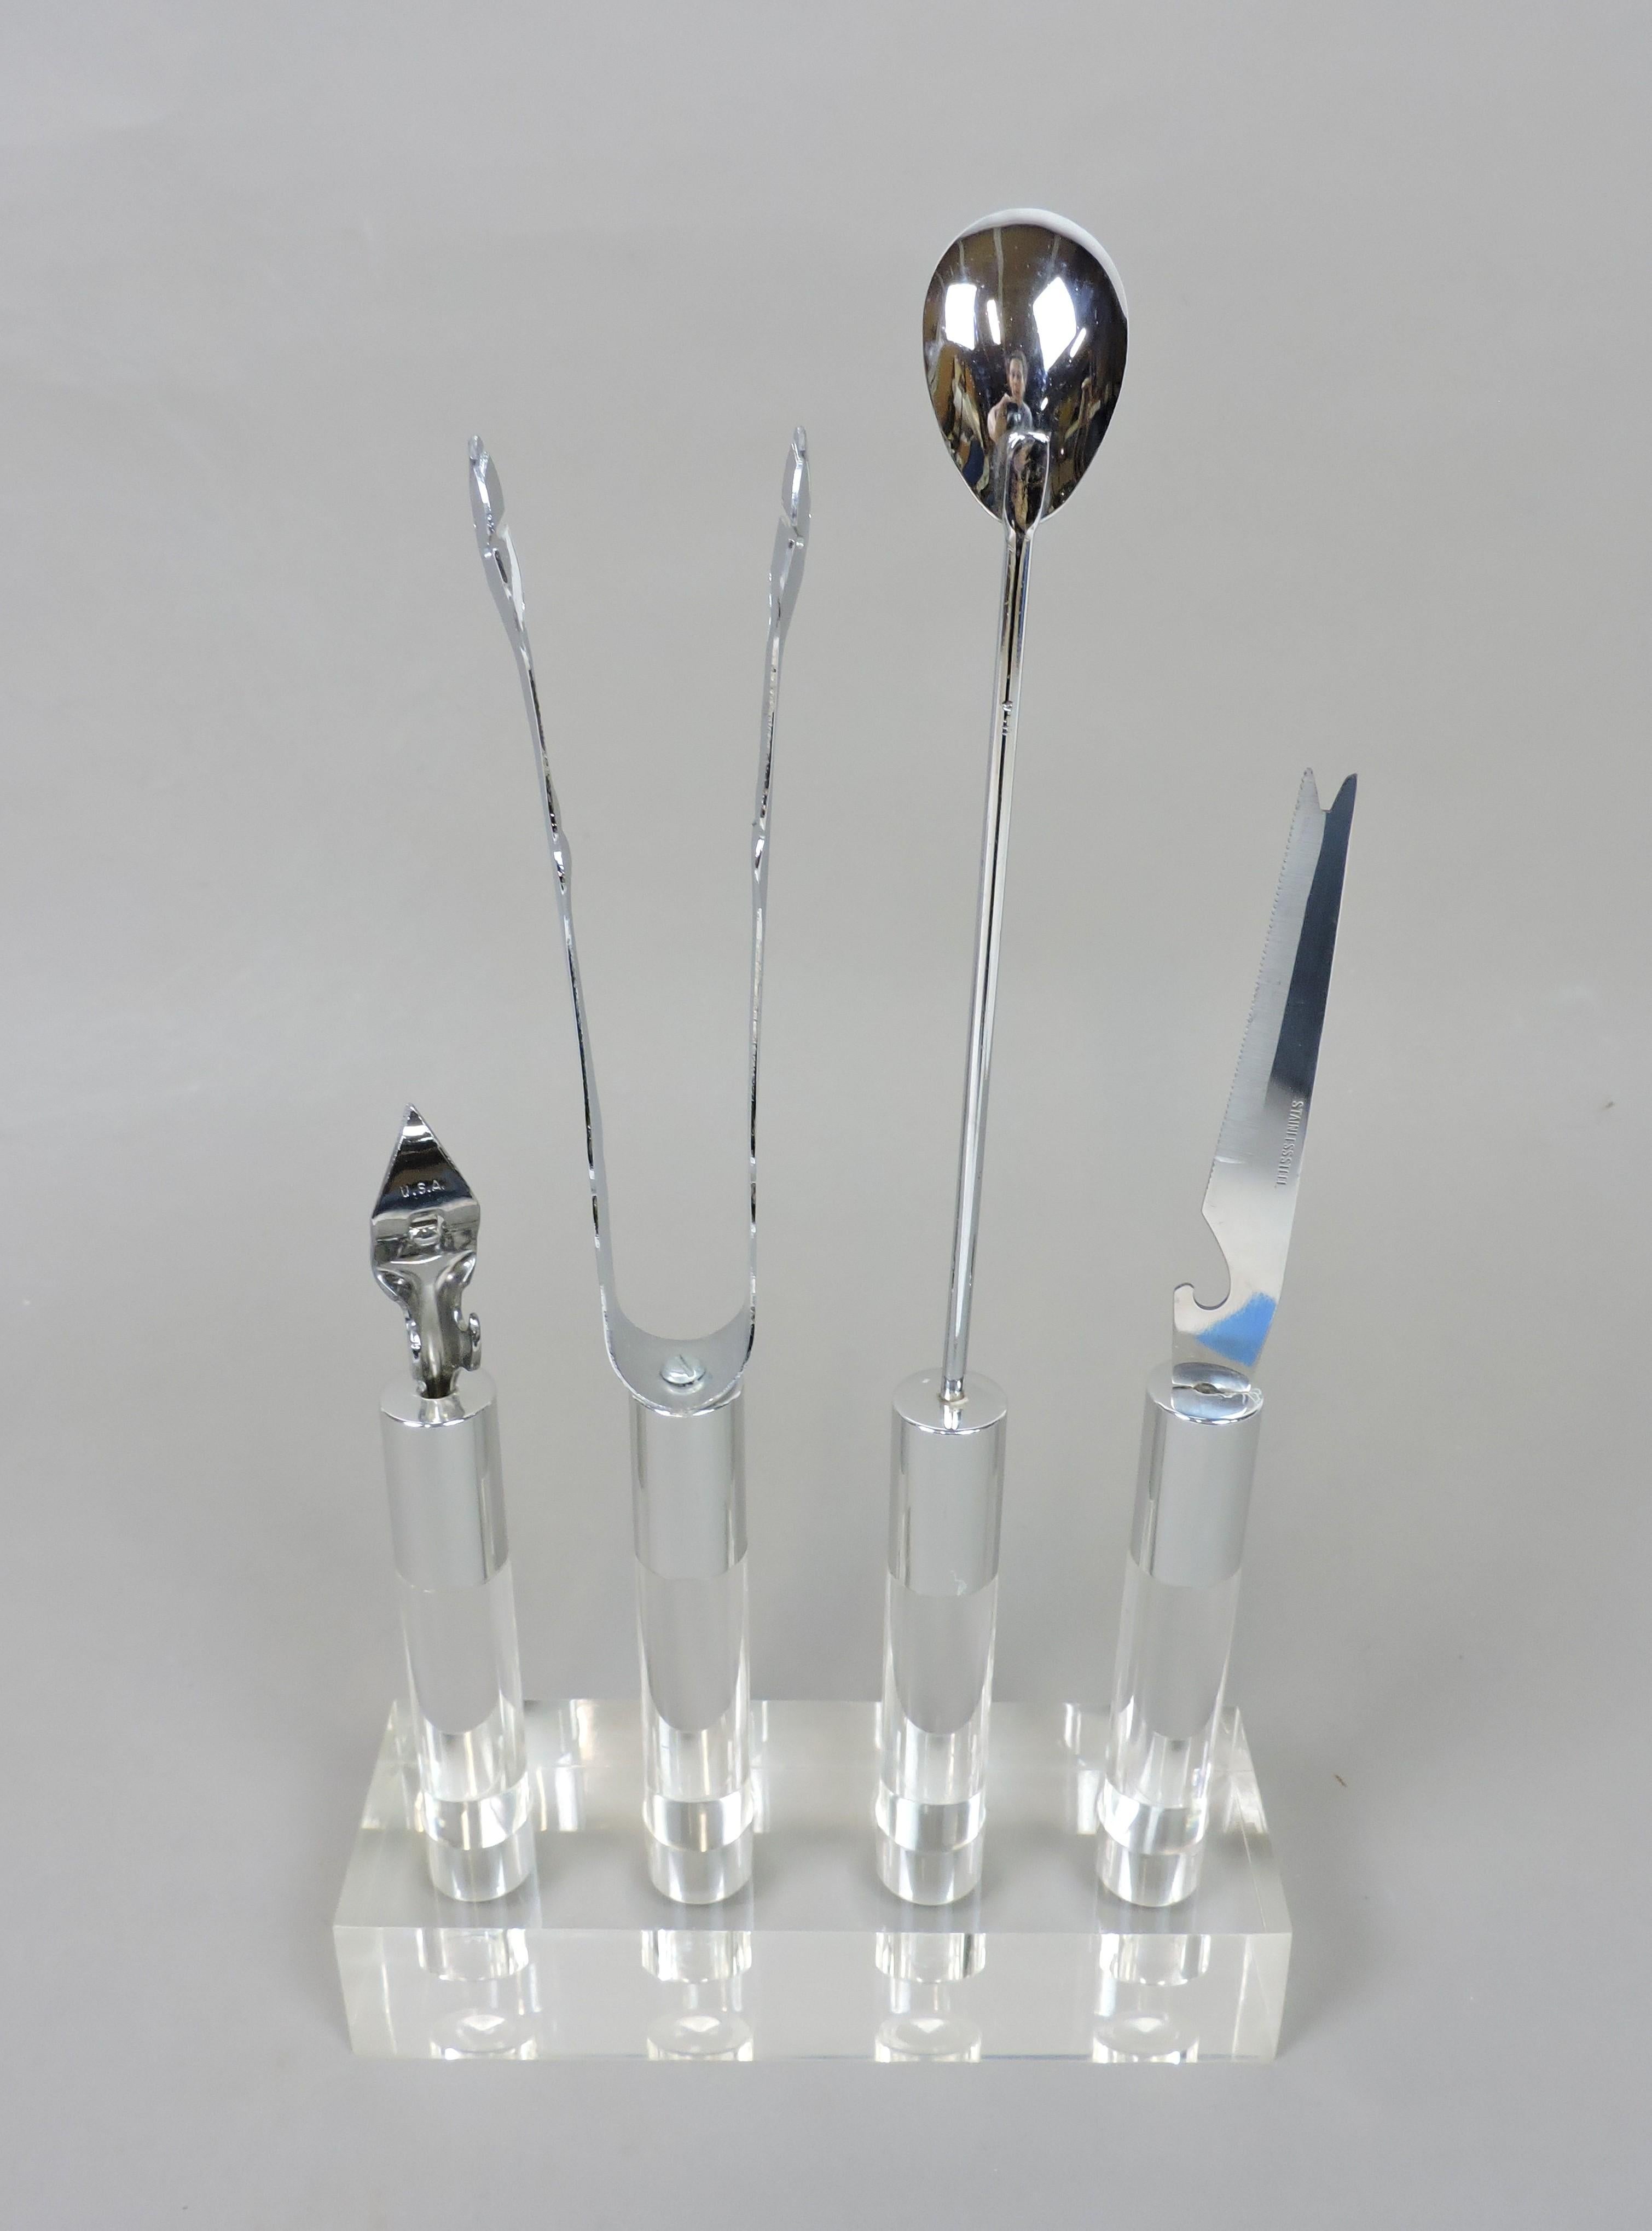 Beautiful 5 piece barware set made of Lucite, chrome and stainless steel. This stylish set consists of a 13 1/4 inch long stirring spoon, a 12 inch pair of tongs, a 10 inch condiment knife, and a 7 1/2 inch bottle/can opener. All utensils have a